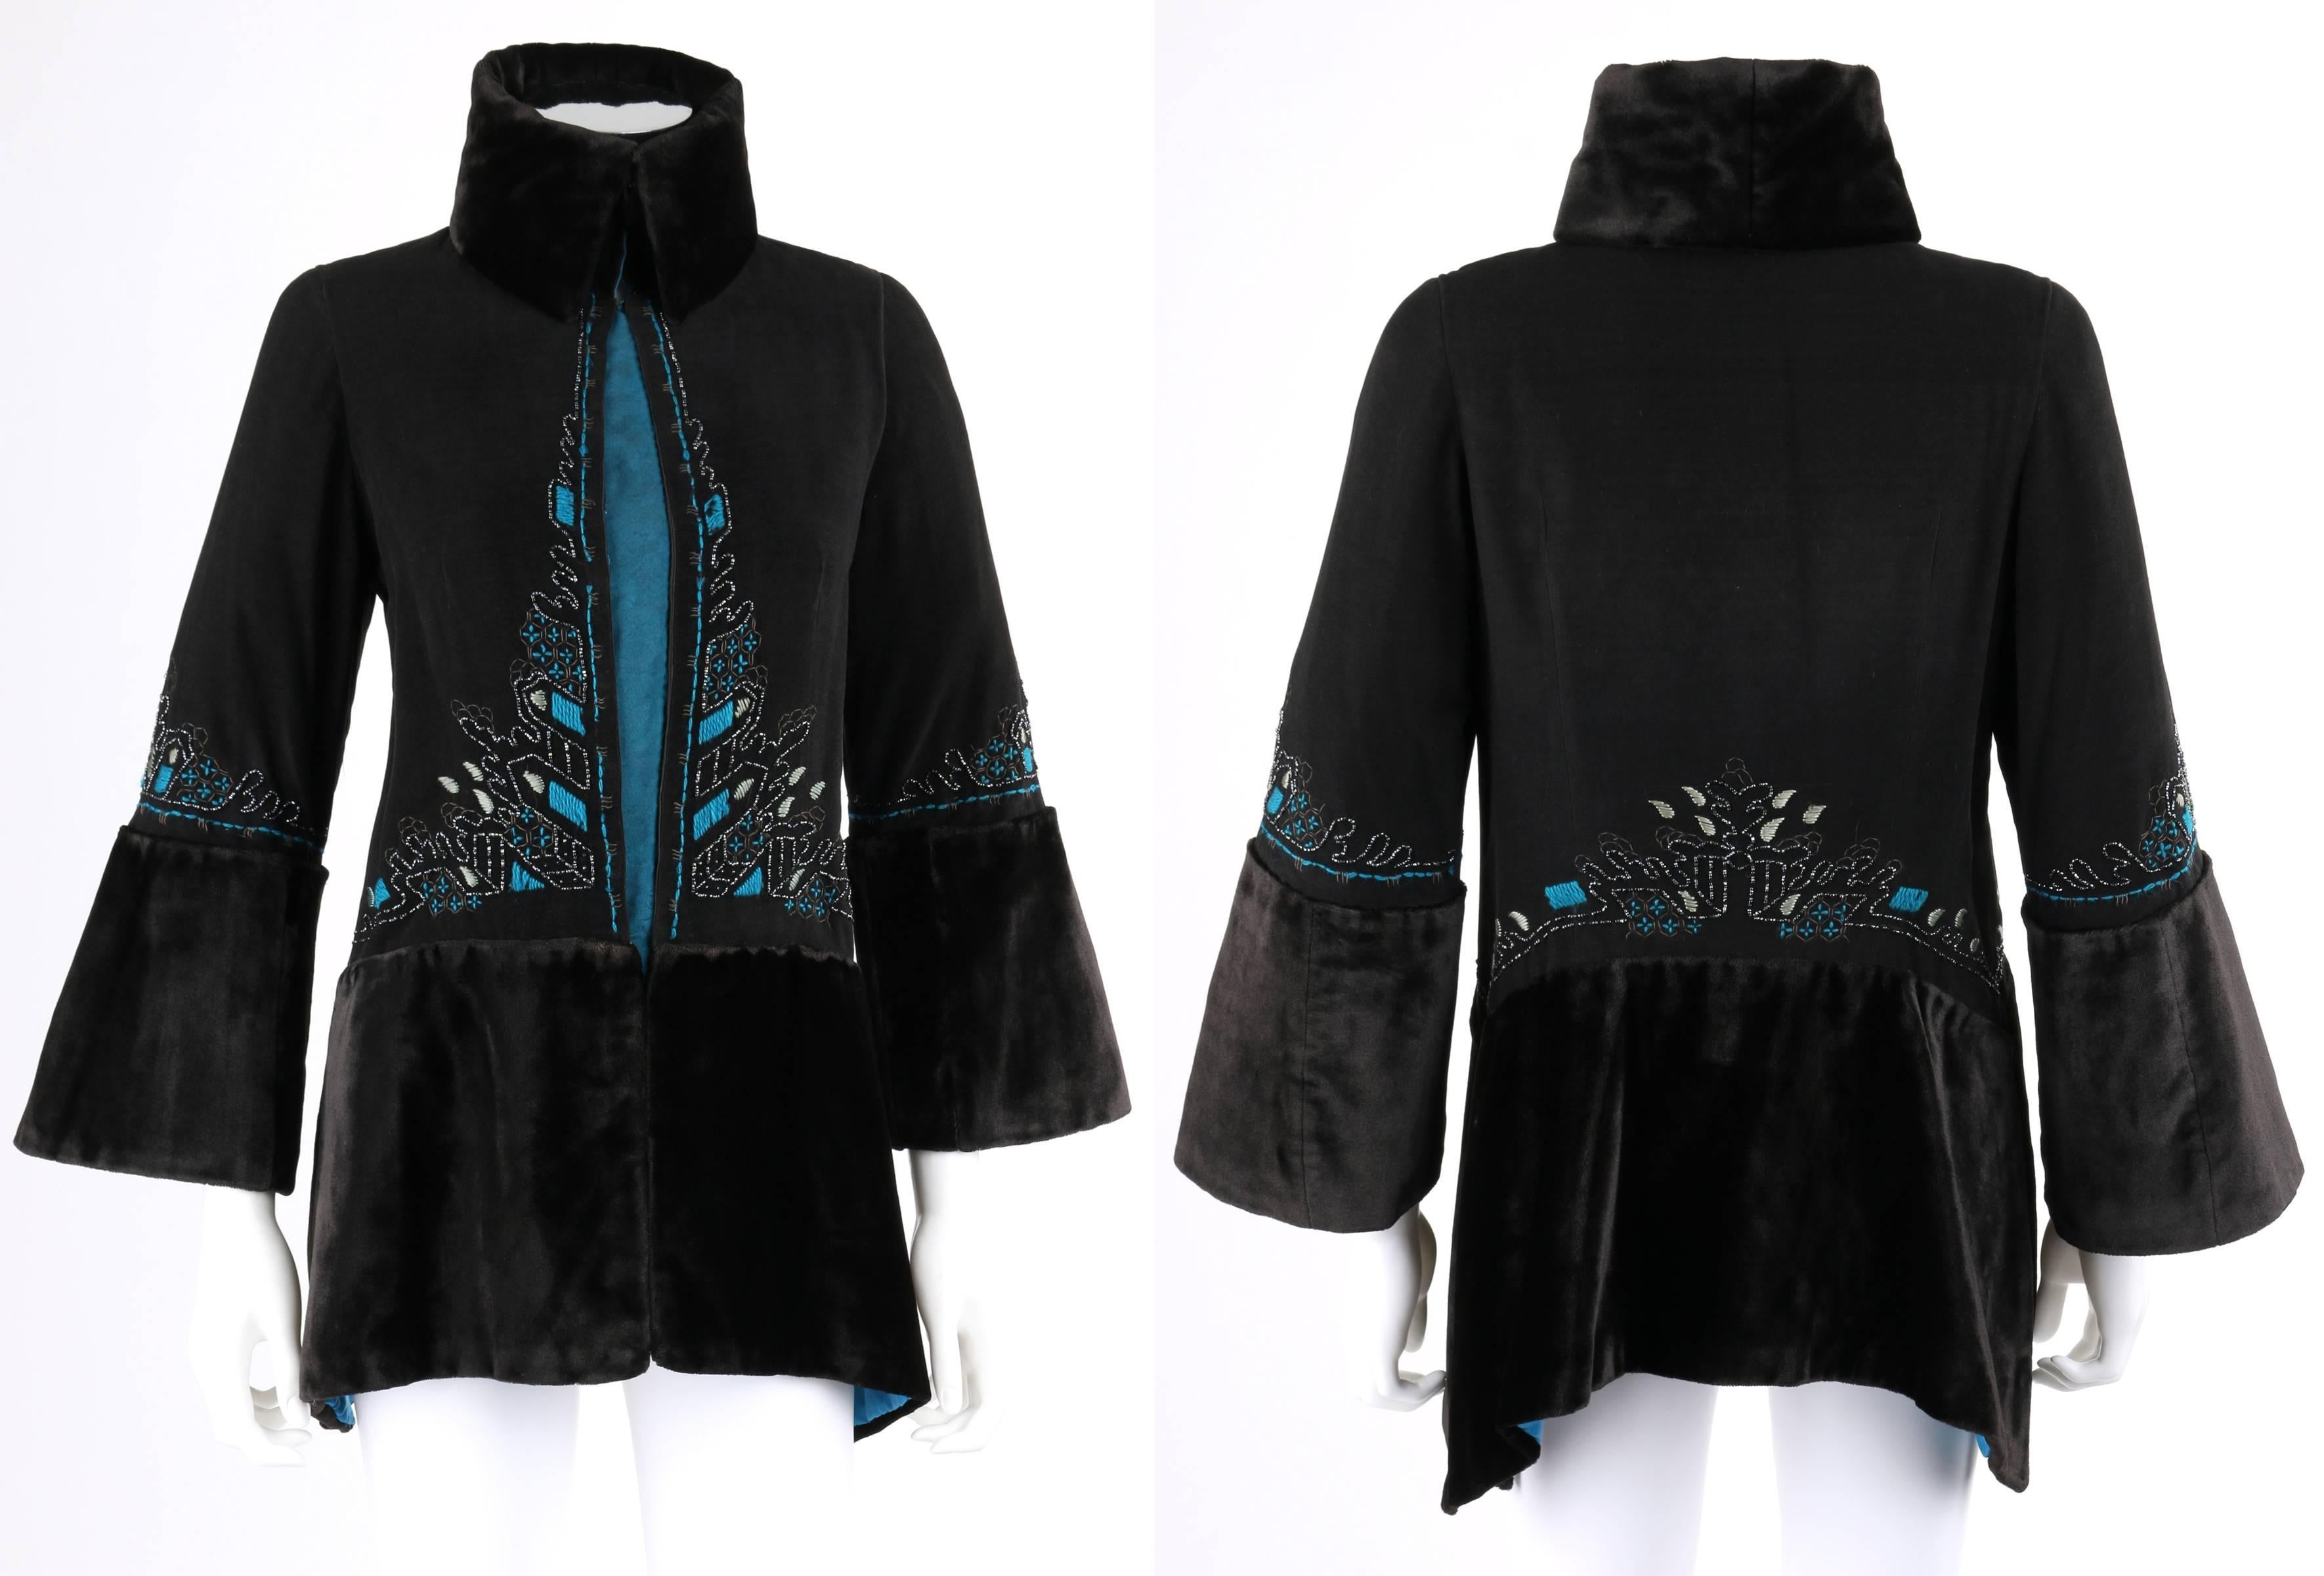 Vintage c.1910's Edwardian Couture one of a kind black & peacock blue / teal wool embroidered jacket. Embroidered detail along center front, waistline, and sleeves in shades of teal, etc., with black beaded embellishment. 3/4 length bell sleeves